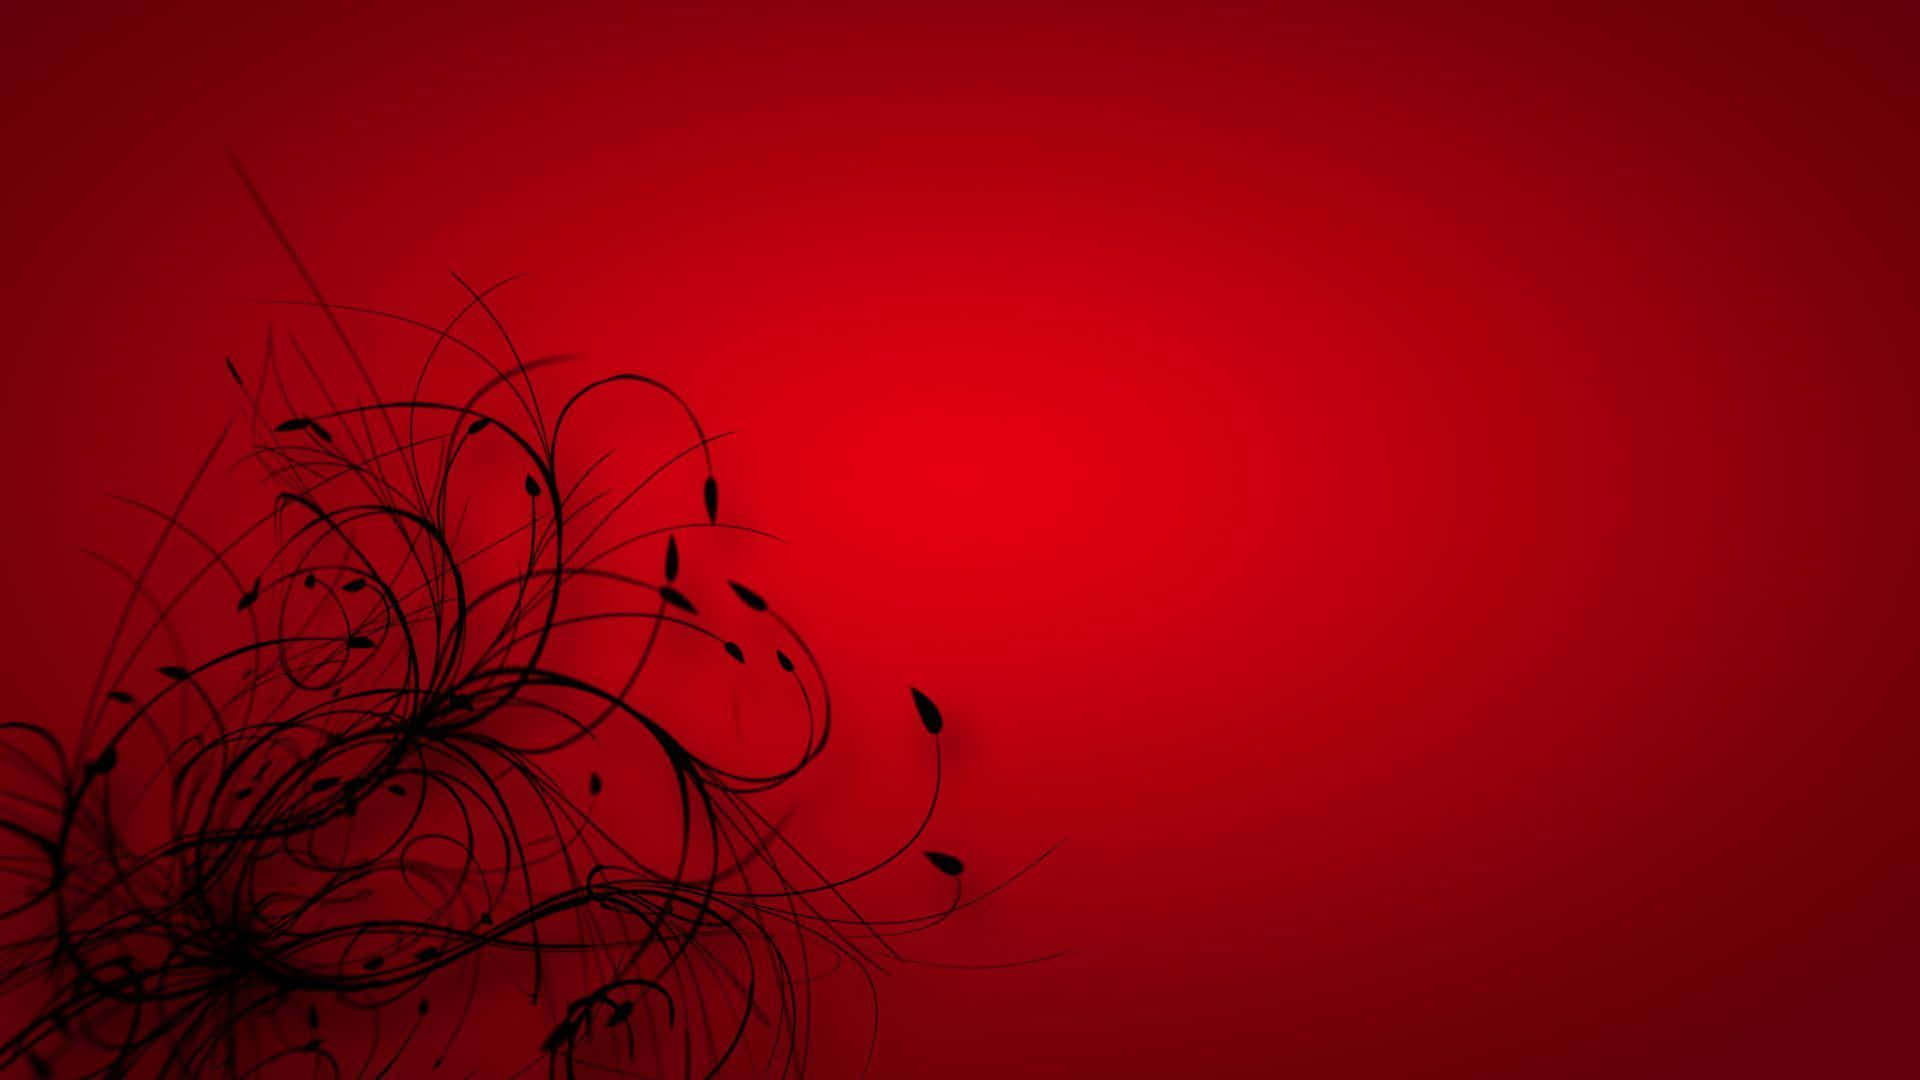 Abstract Red And Black Background With Vignette Effect